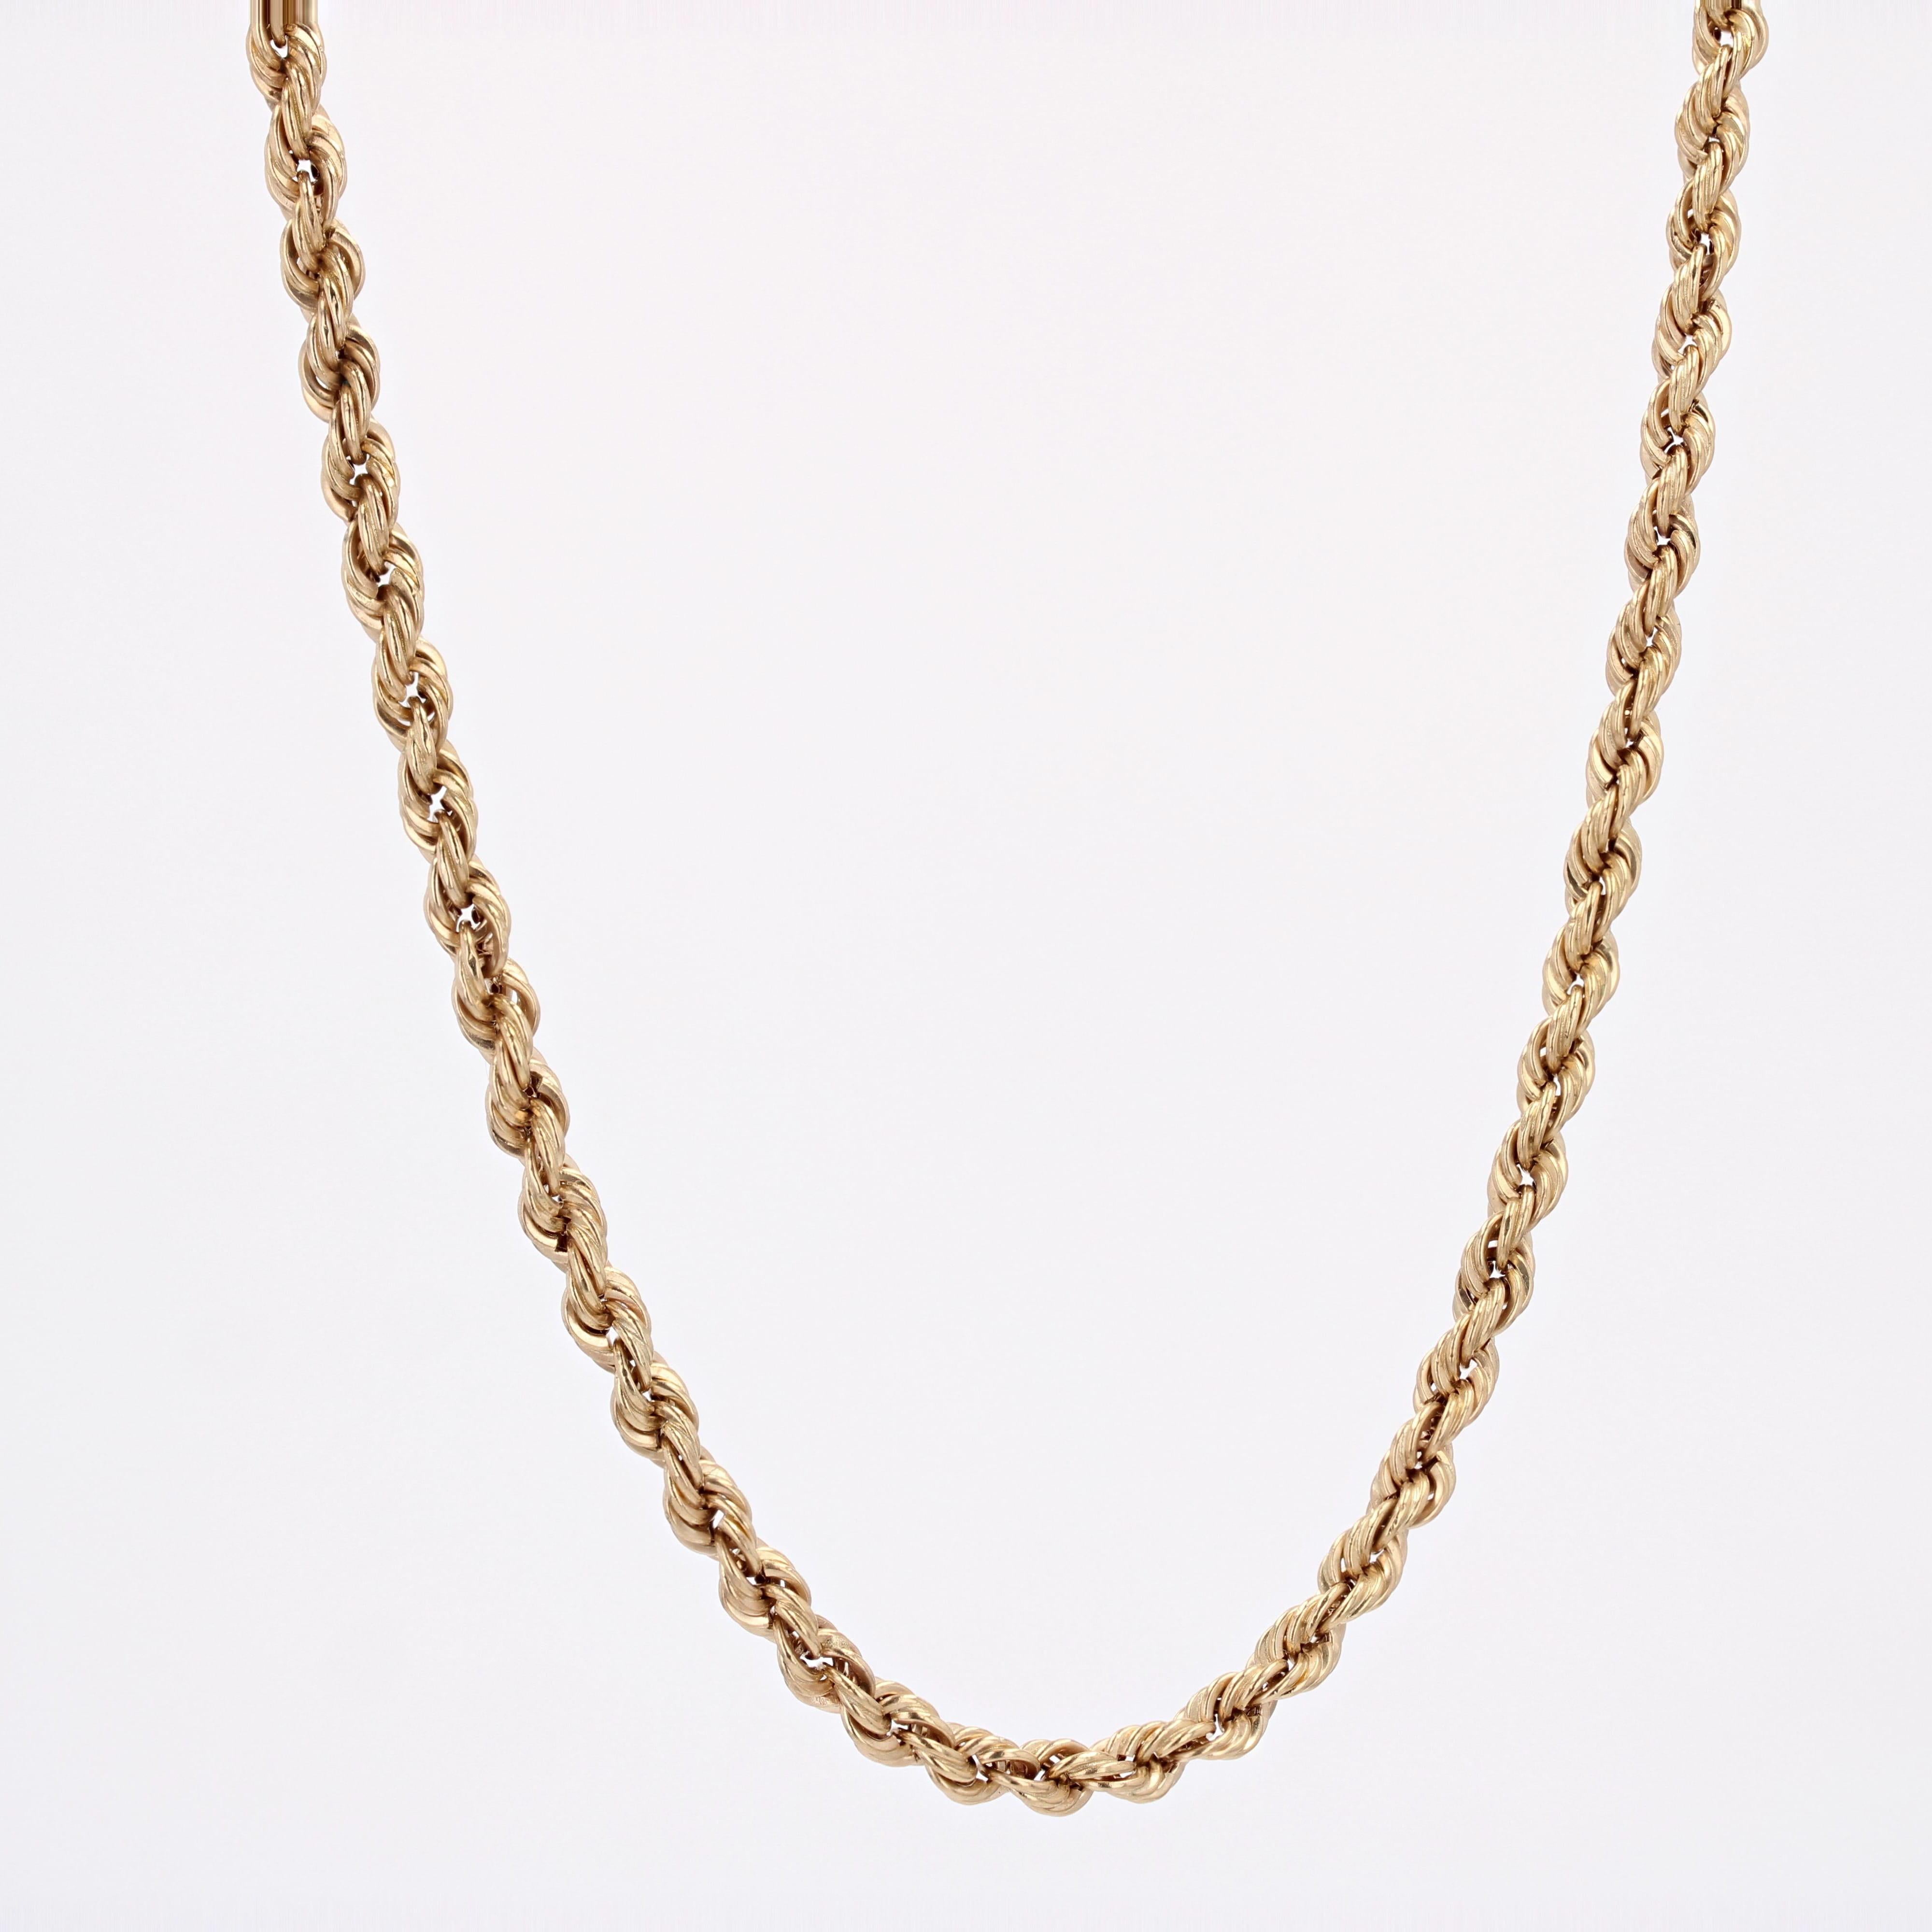 1960s 18 Karat Yellow Gold Retro Twisted Chain Long Necklace For Sale 1